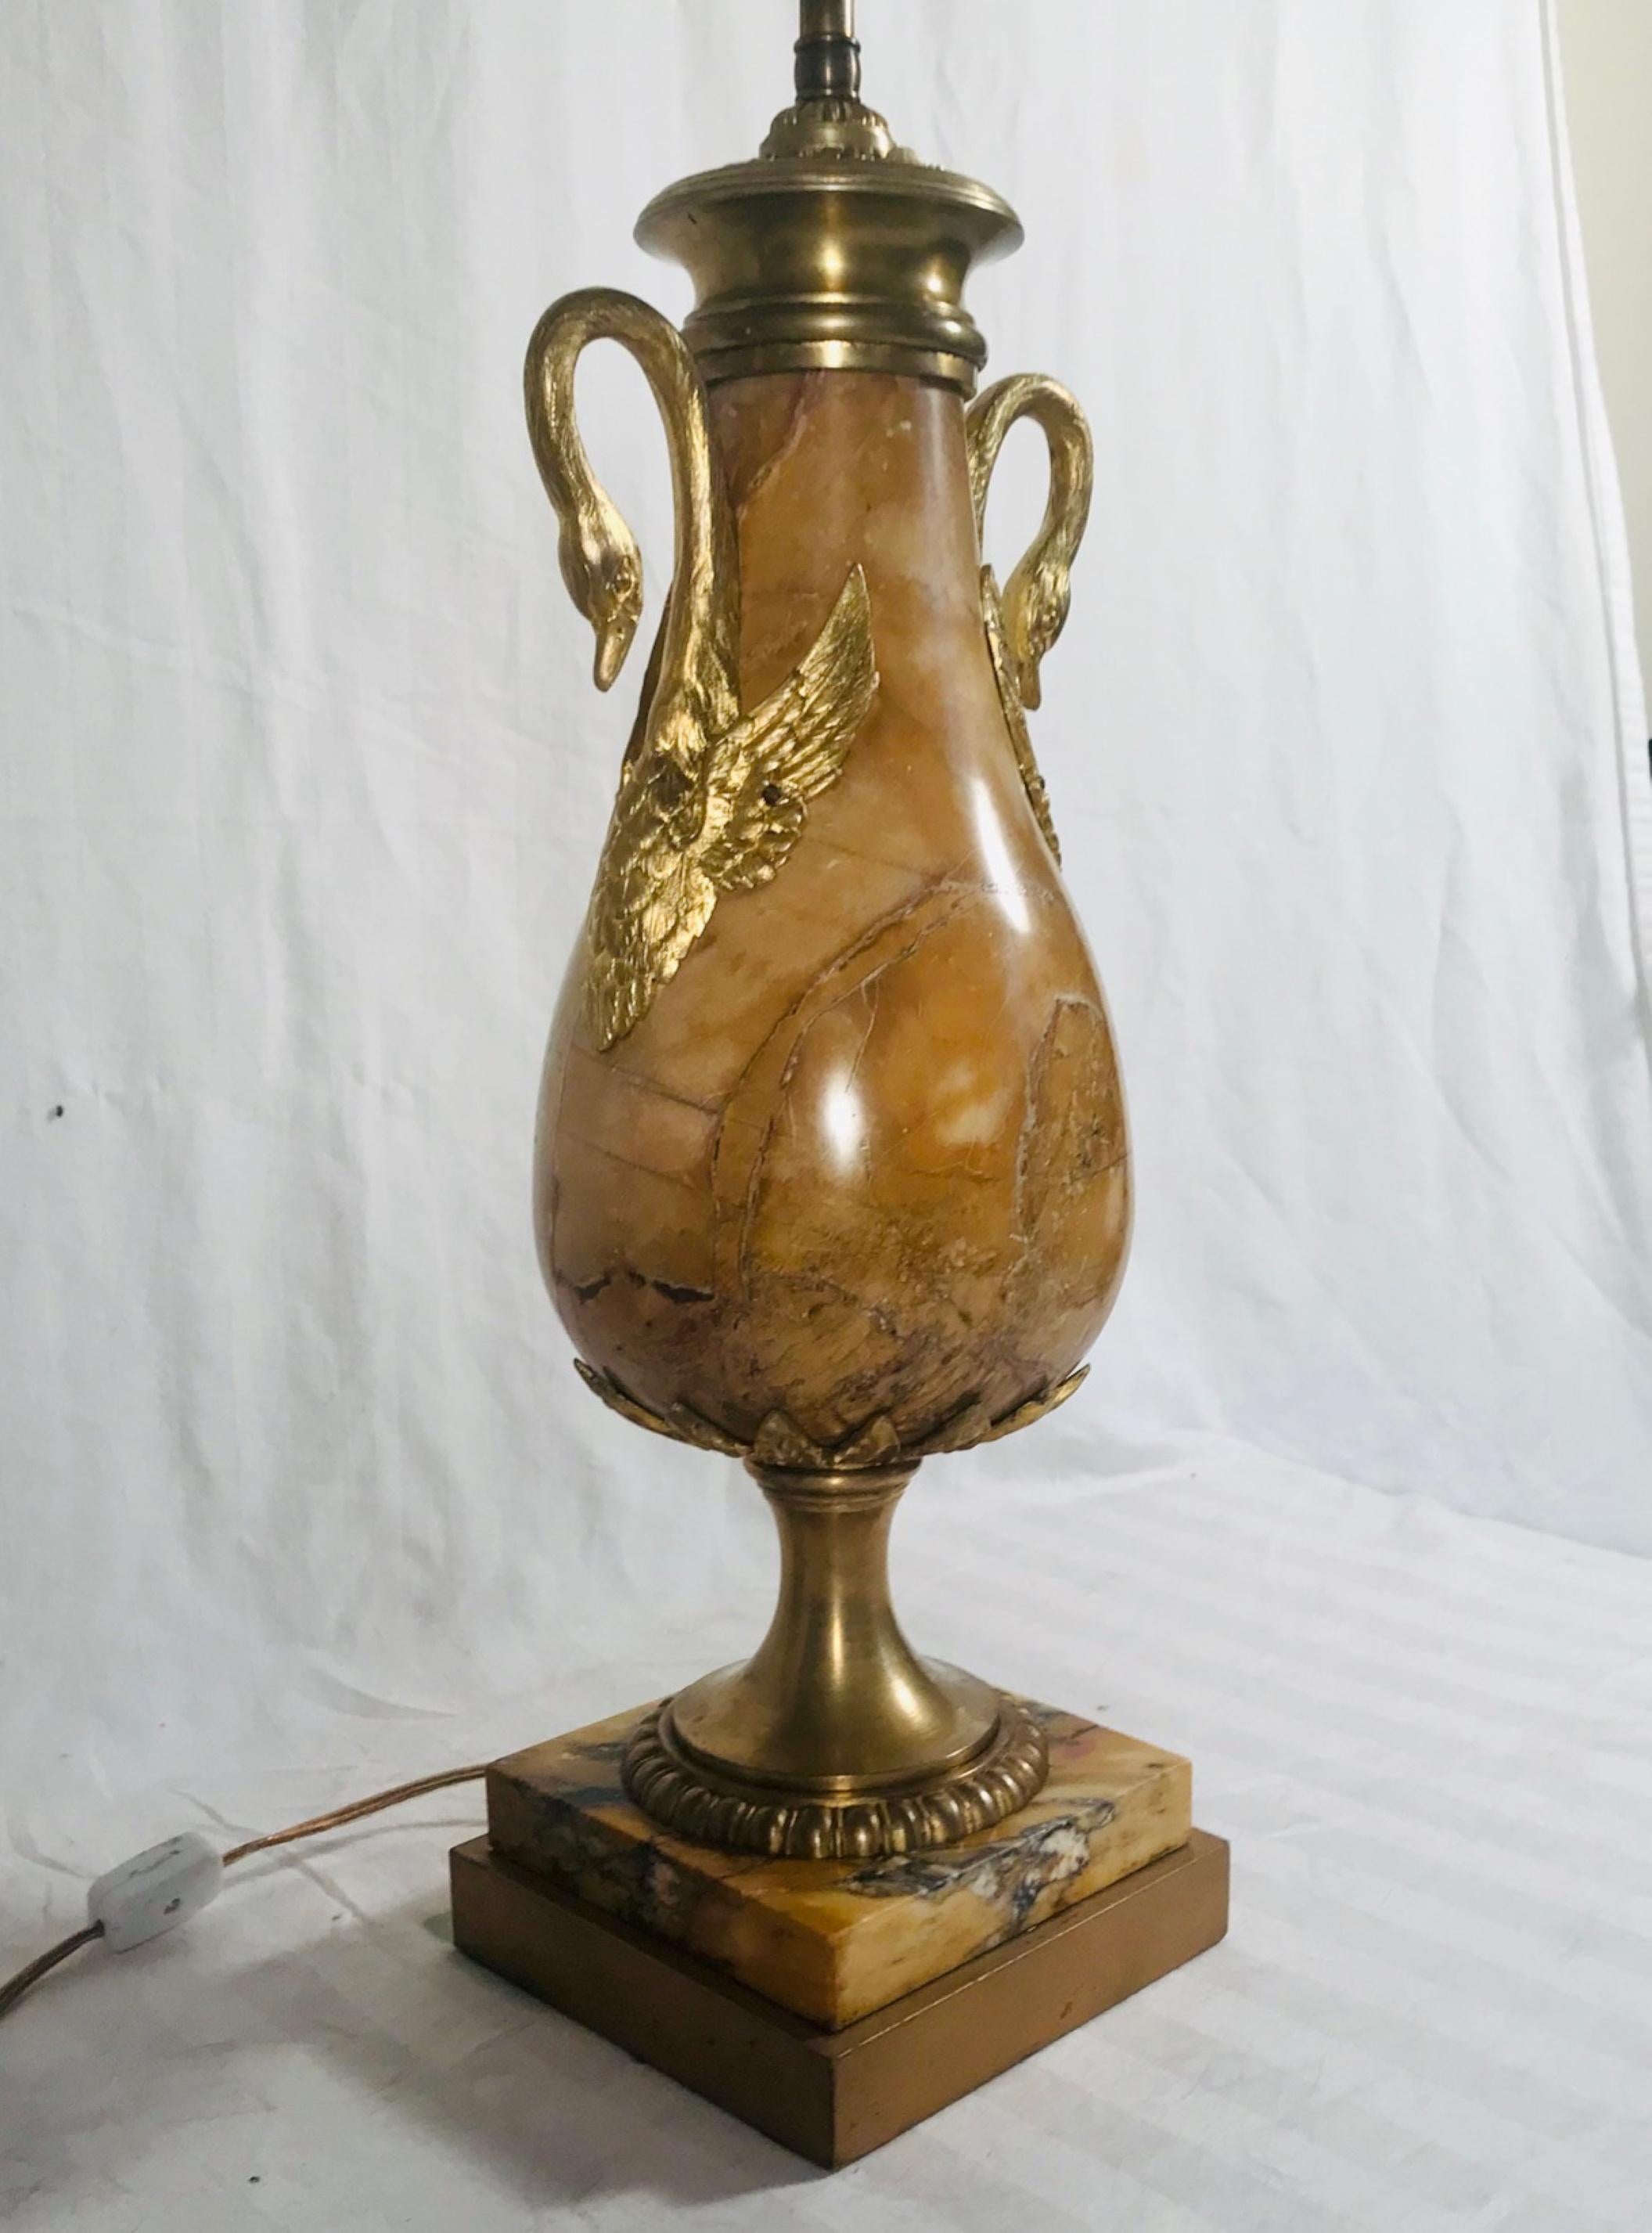 Antique French Louis XVI Style Sienna Marble and Ormolu Urn In Good Condition For Sale In Vero Beach, FL